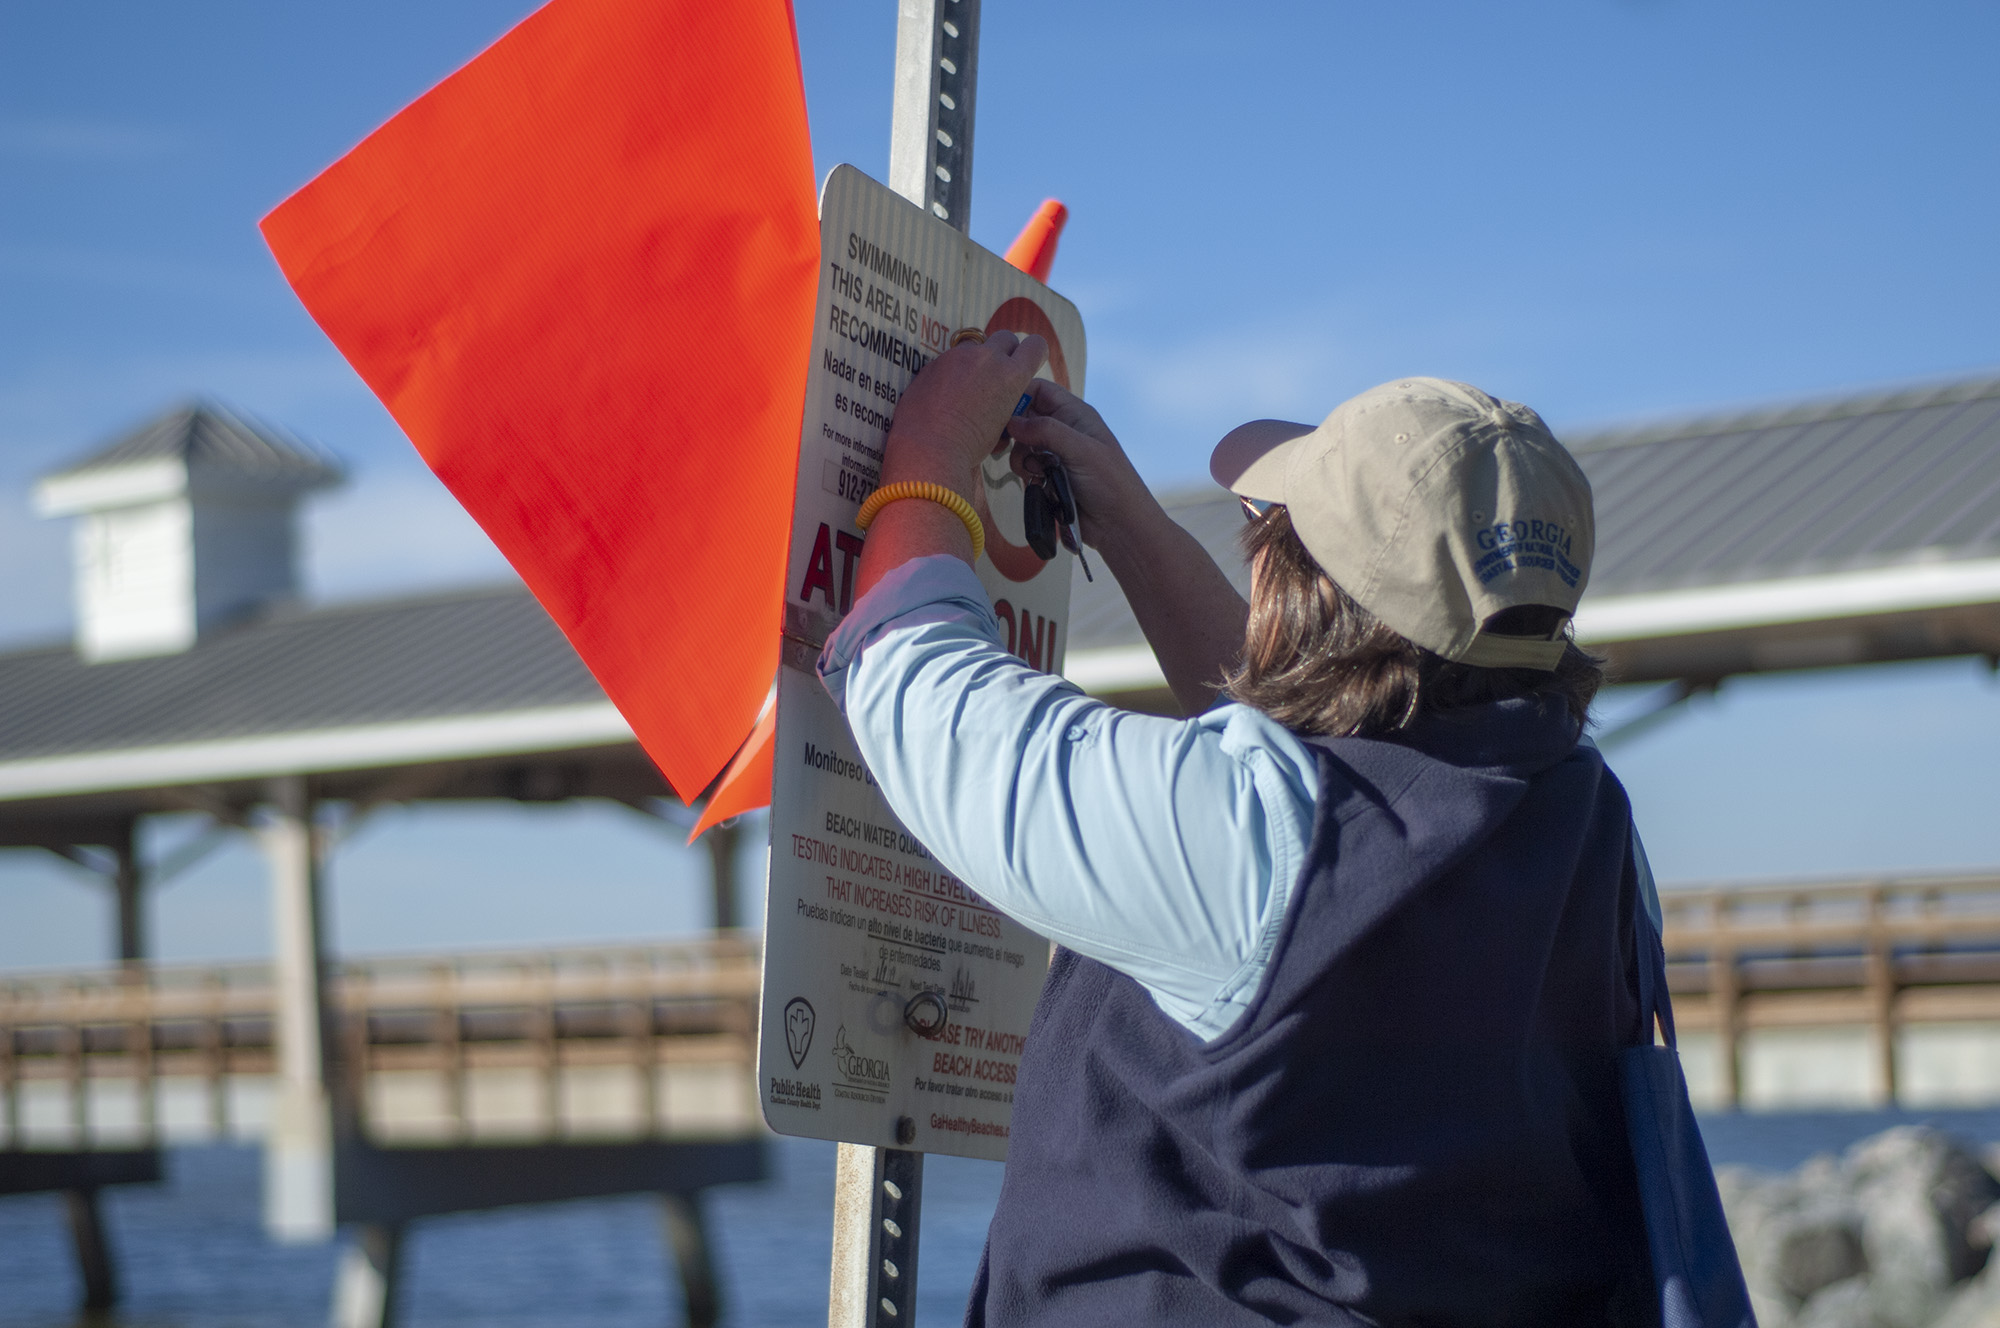 : Elizabeth Cheney, a beach water quality manager with the Coastal Resources Division of the Georgia Department of Natural Resources, tends to a beach advisory sign near Pier Village on St. Simons Island.